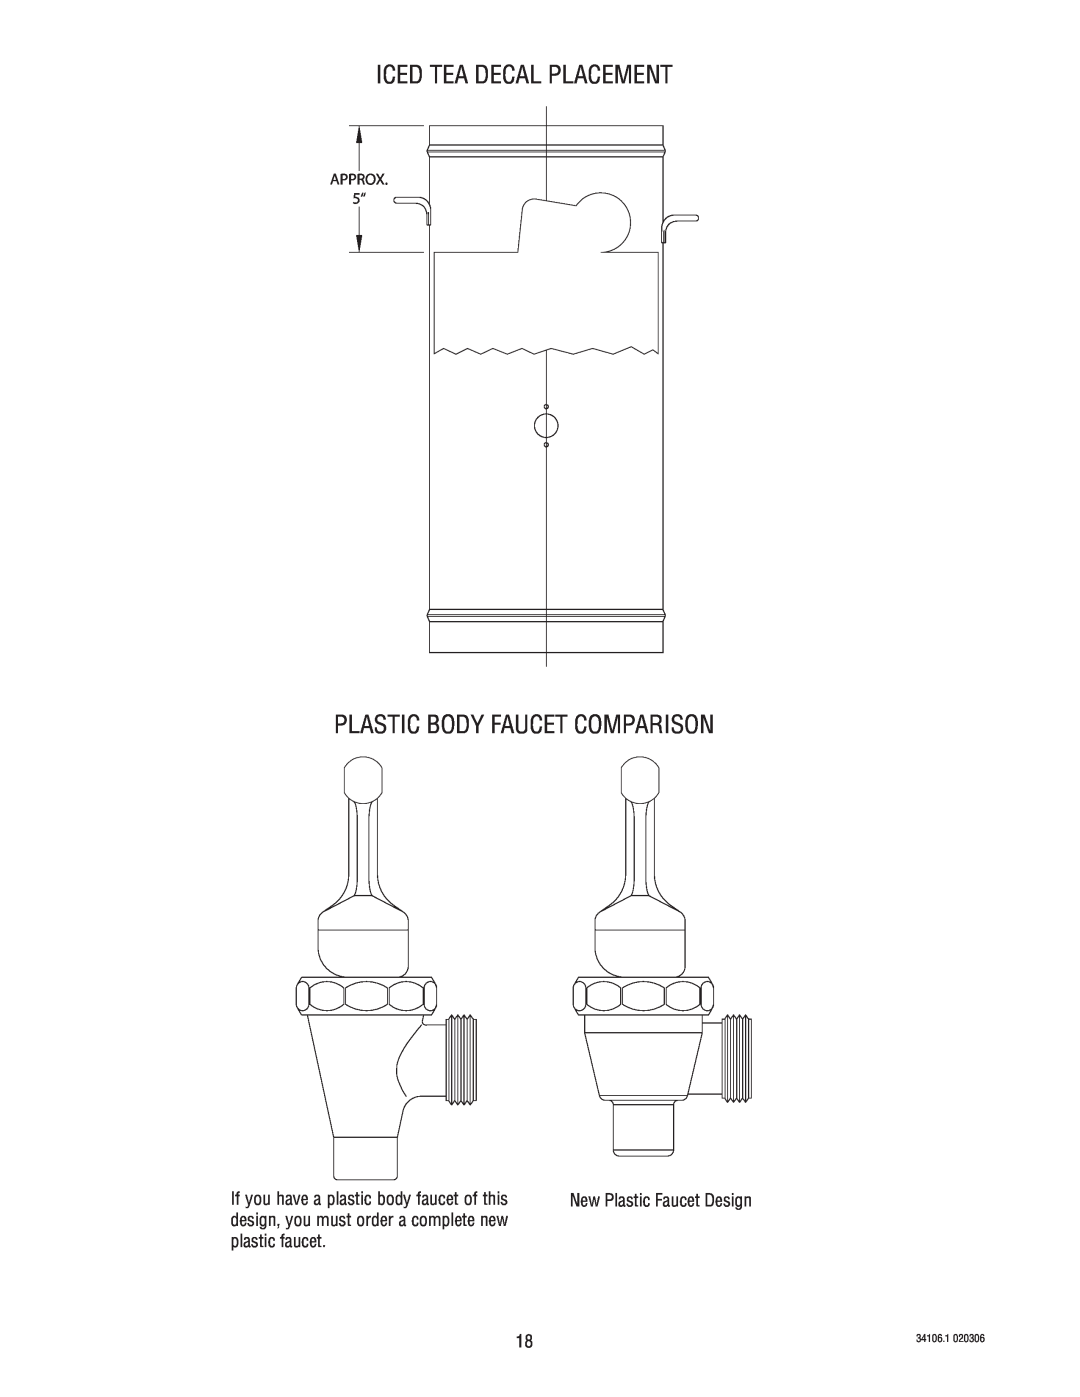 Bunn TCD - 1/2 Iced Tea Decal Placement, Plastic Body Faucet Comparison, APPROX 5“, New Plastic Faucet Design, 34106.1 